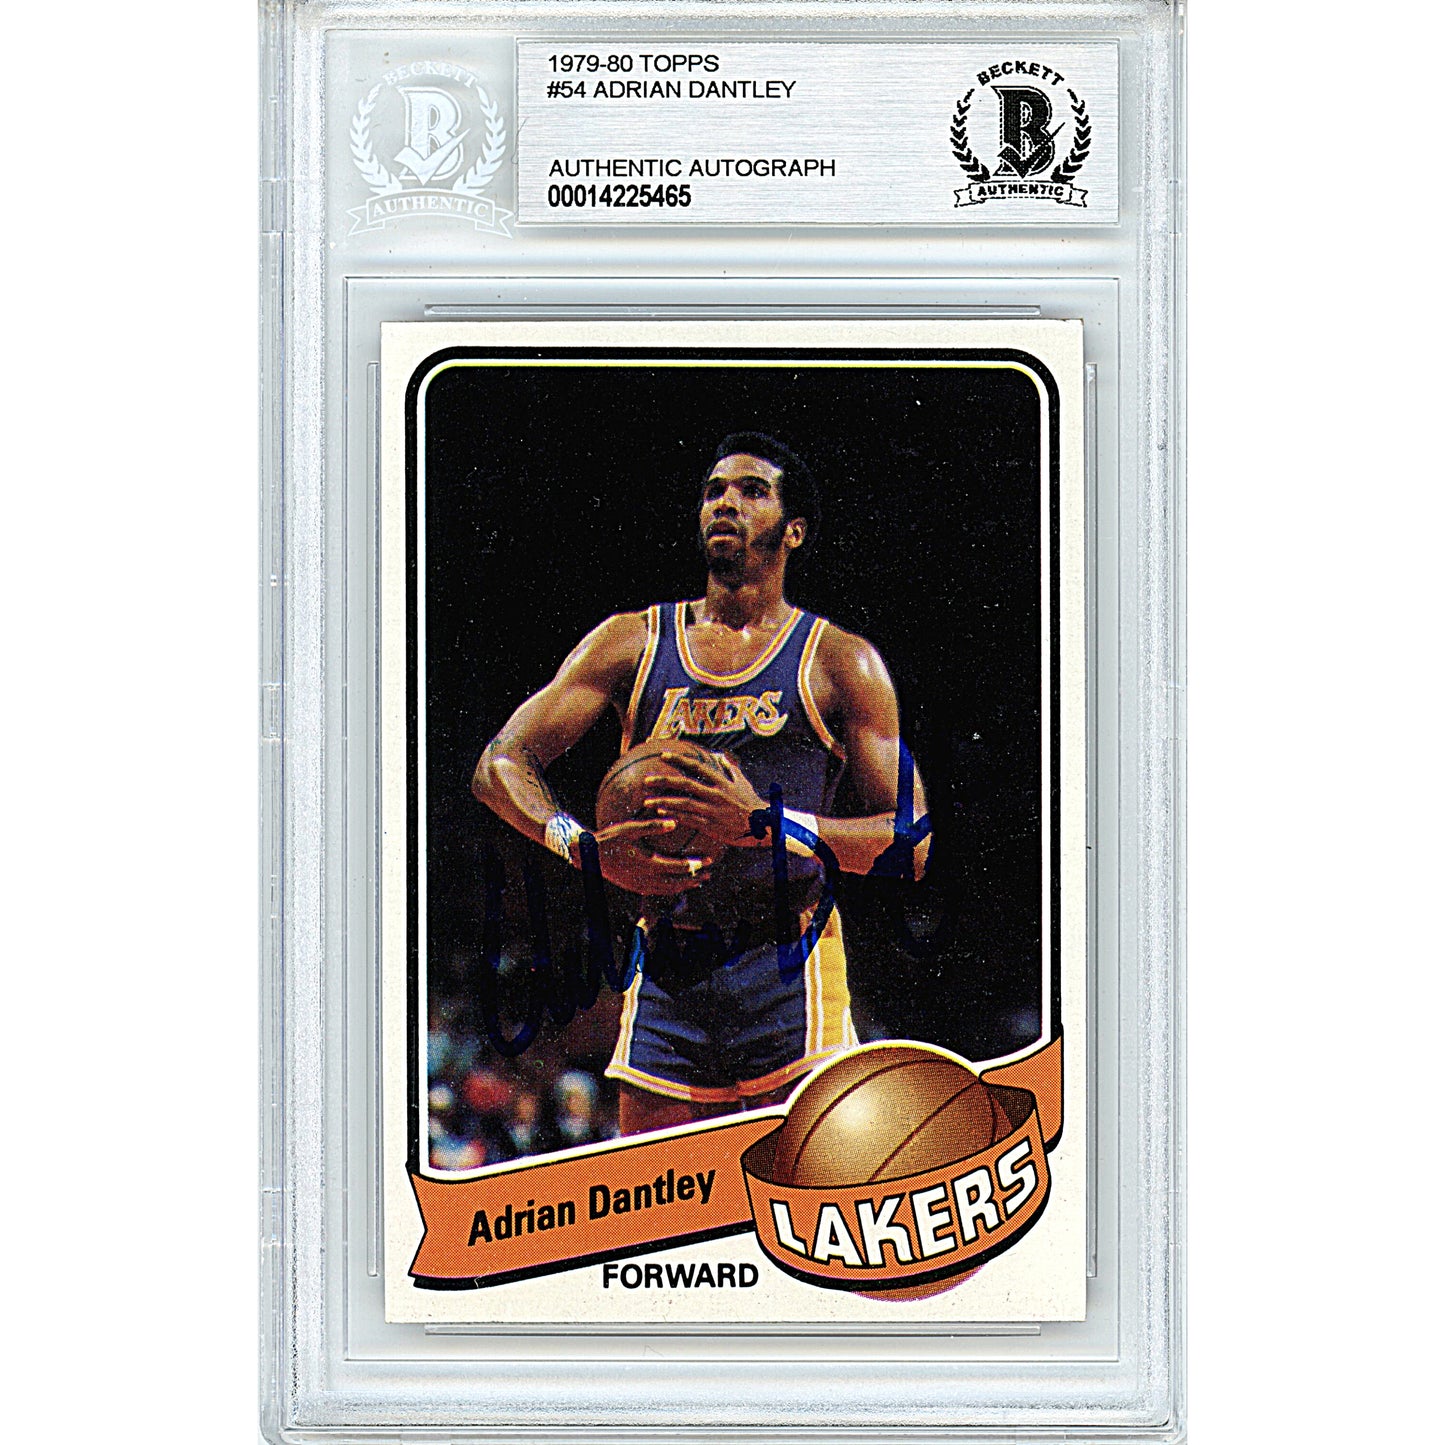 Basketballs- Autographed- Adrian Dantley Signed Los Angeles Lakers 1979-1980 Topps Basketball Card Beckett BAS Slabbed 00014225465 - 101